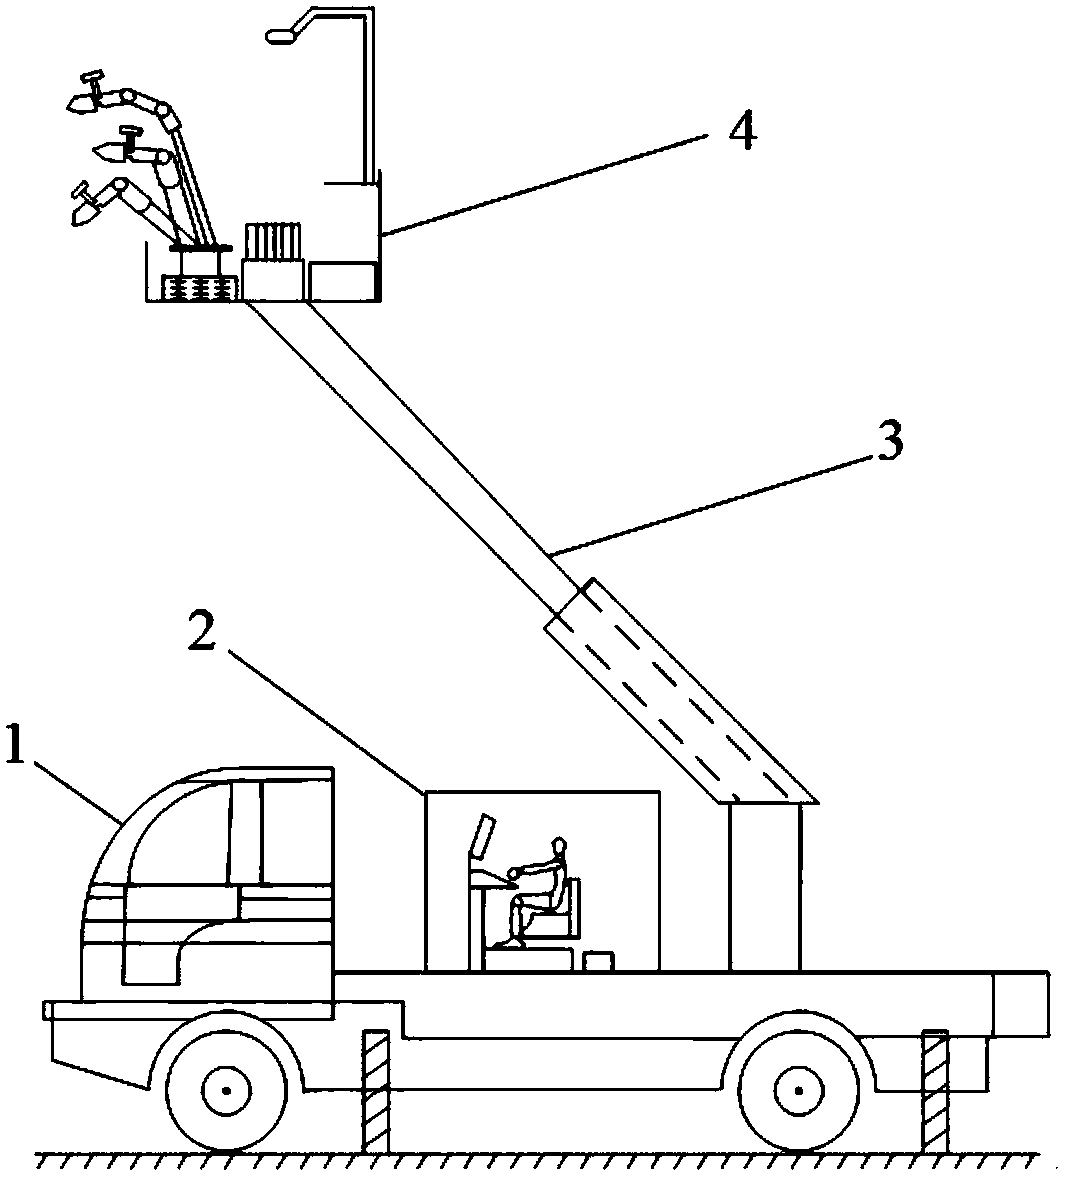 Replacement method for special tool for hot-line robot based on force feedback master-slave control